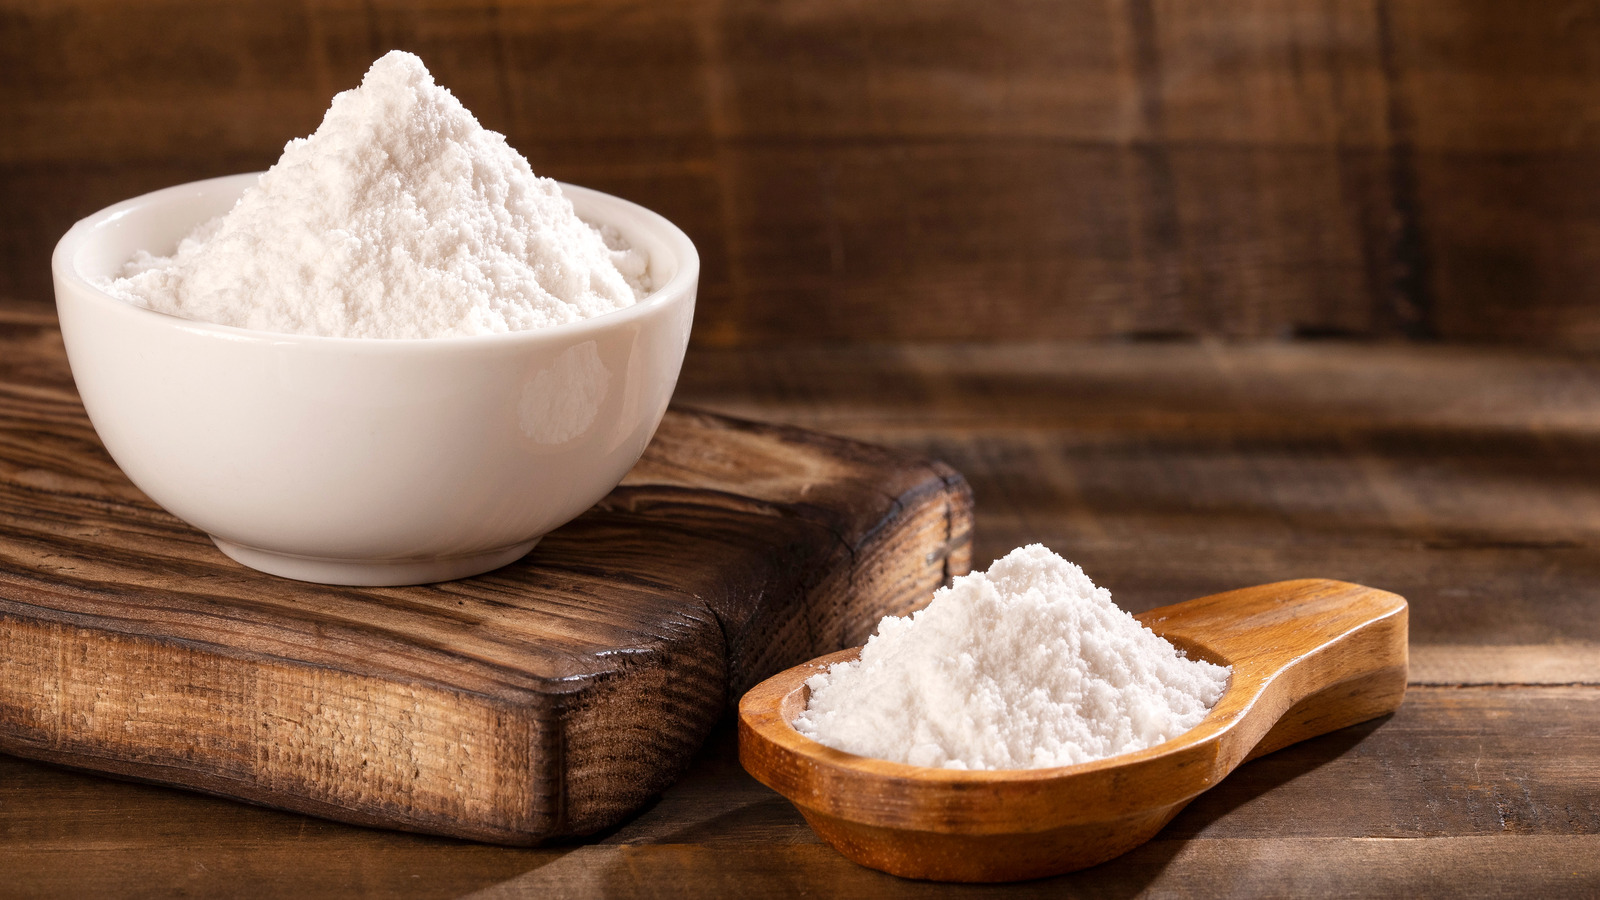 Is Baking Soda Safe To Drink? 